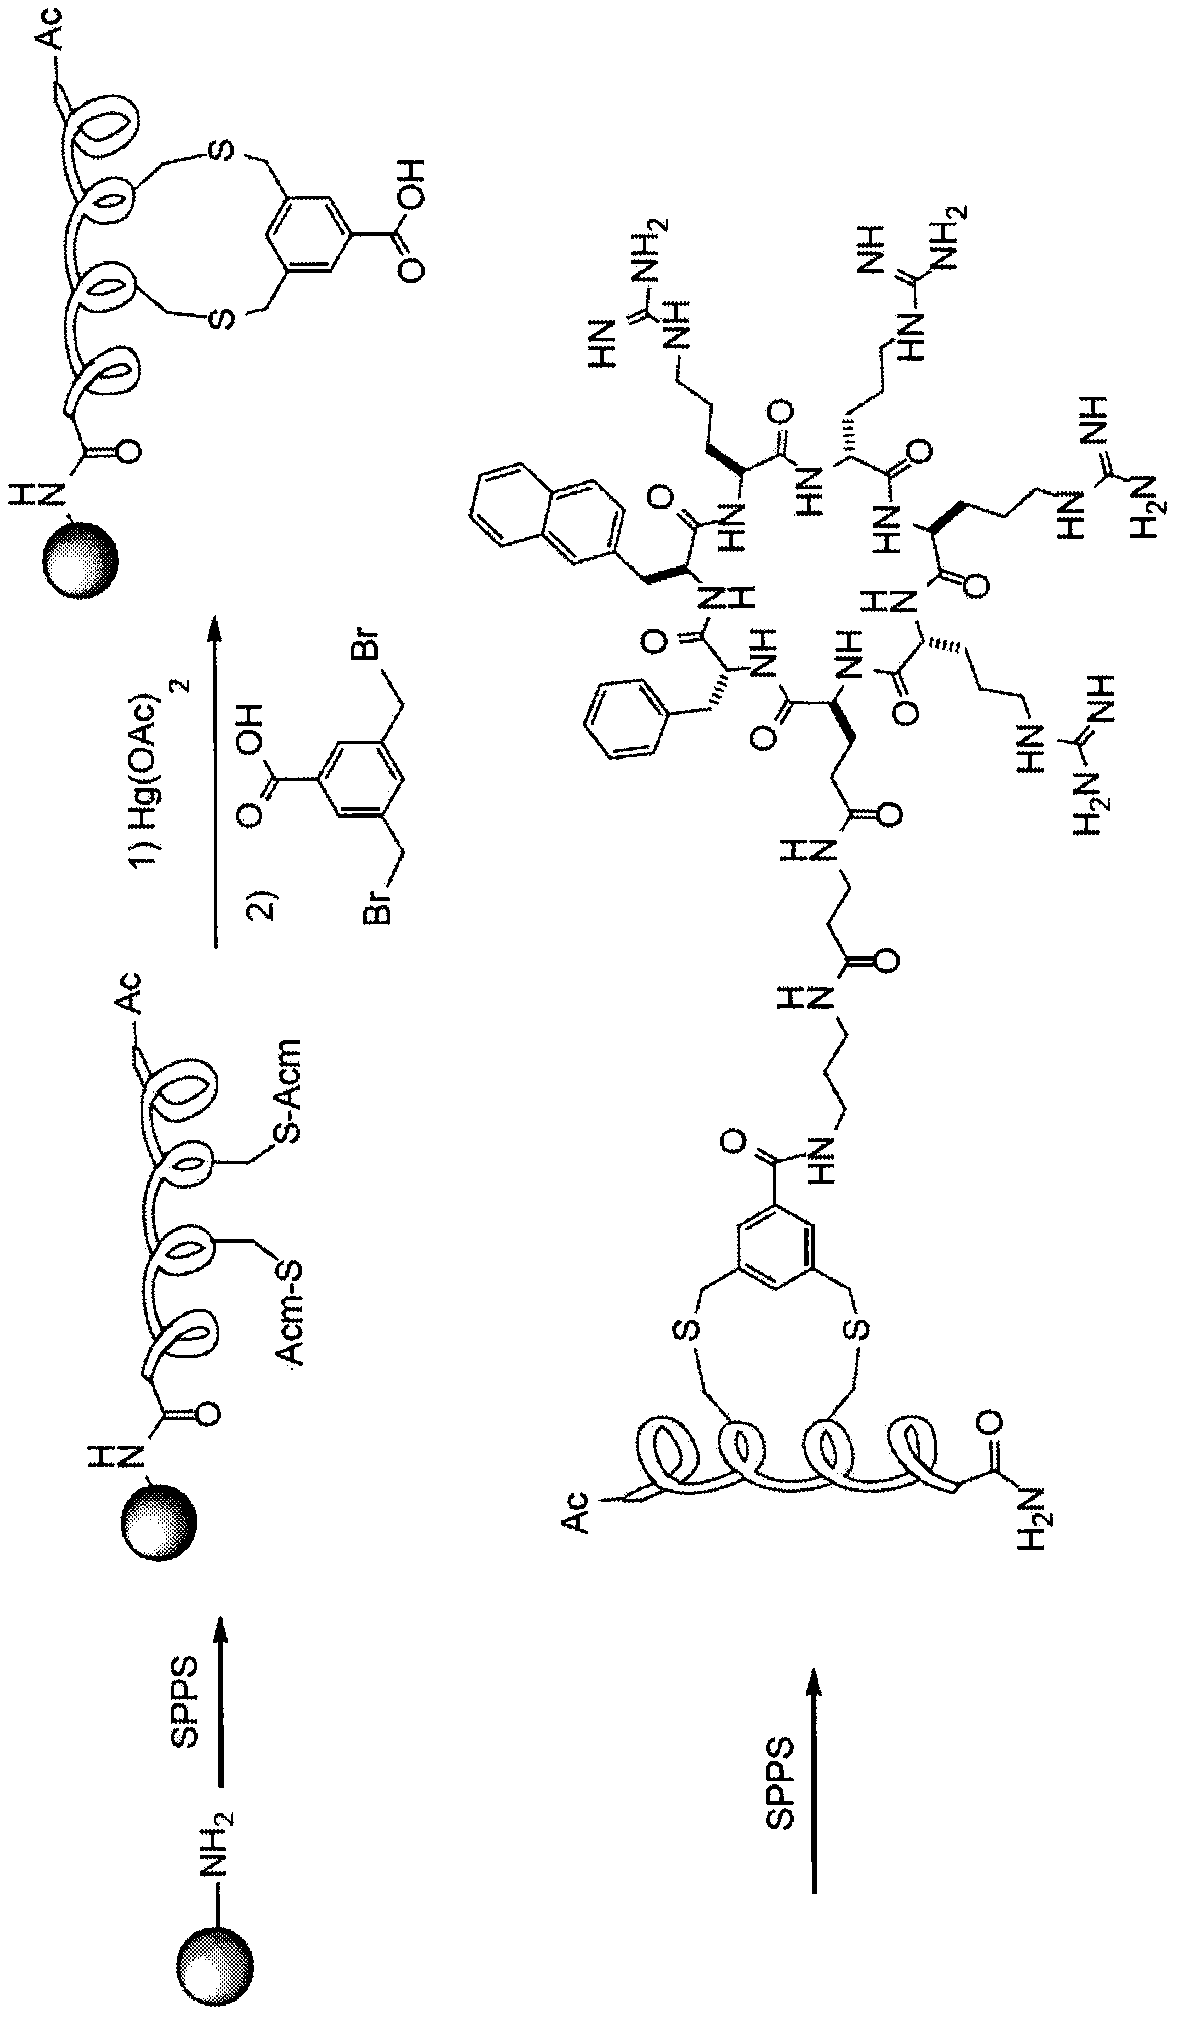 Polypeptide conjugates for intracellular delivery of stapled peptides